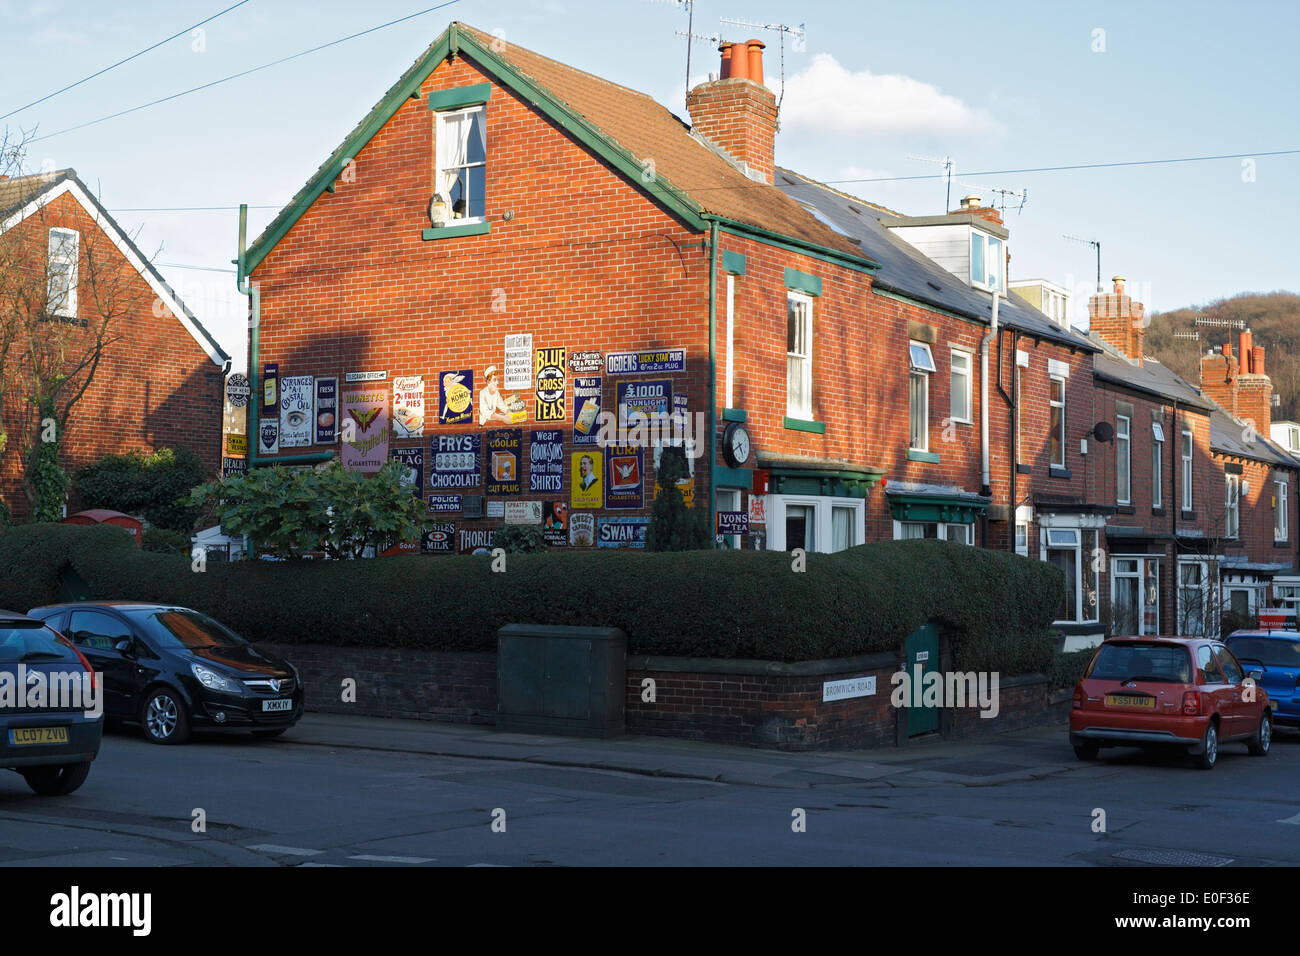 End of Terrace House with Old Vintage Shops signs Woodseats Sheffield England Stock Photo